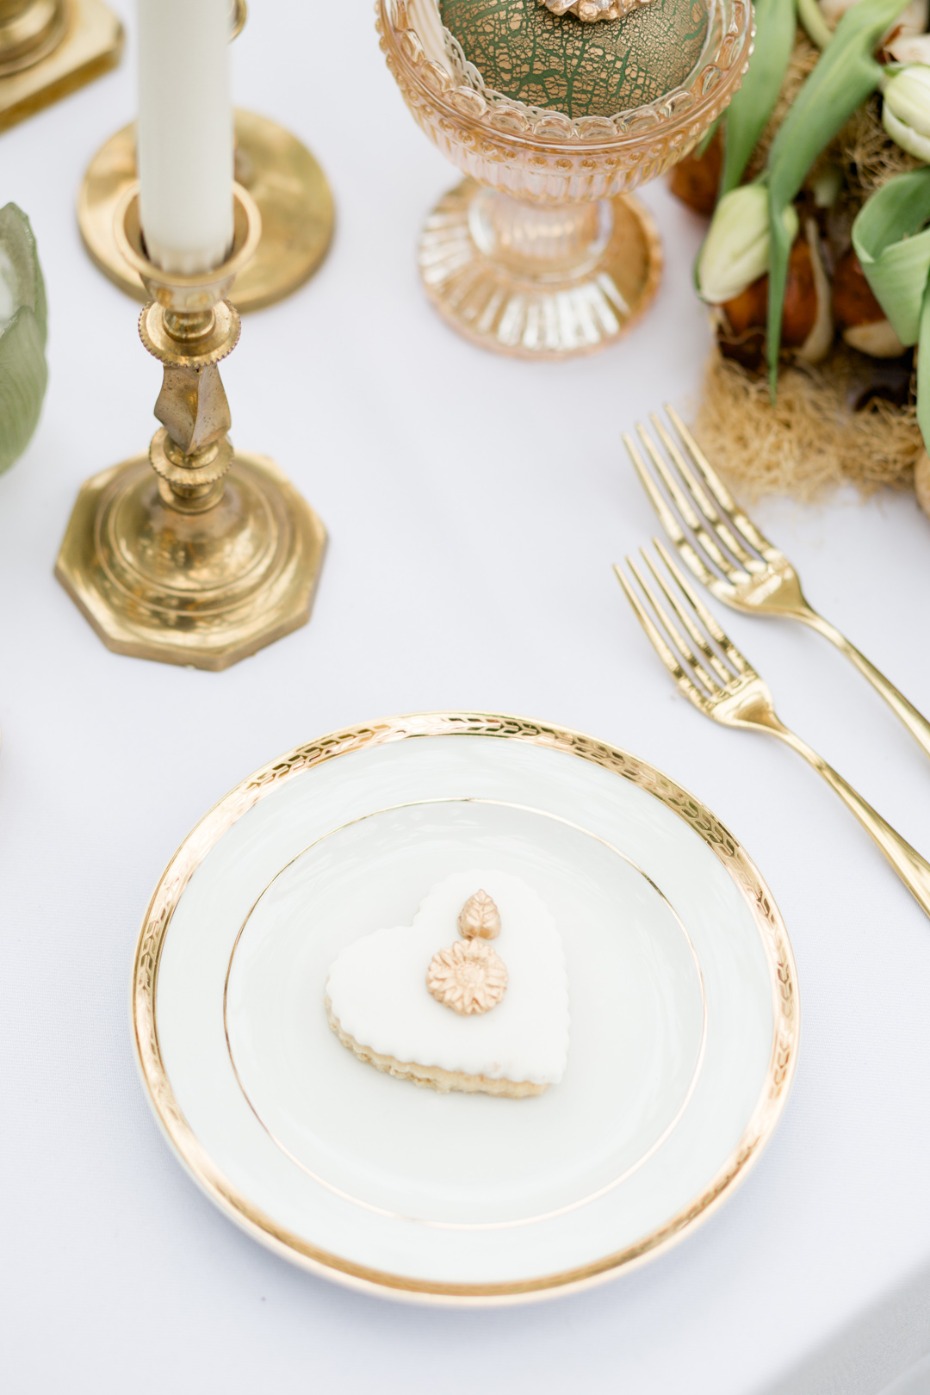 Gold-rimmed plates for a wedding